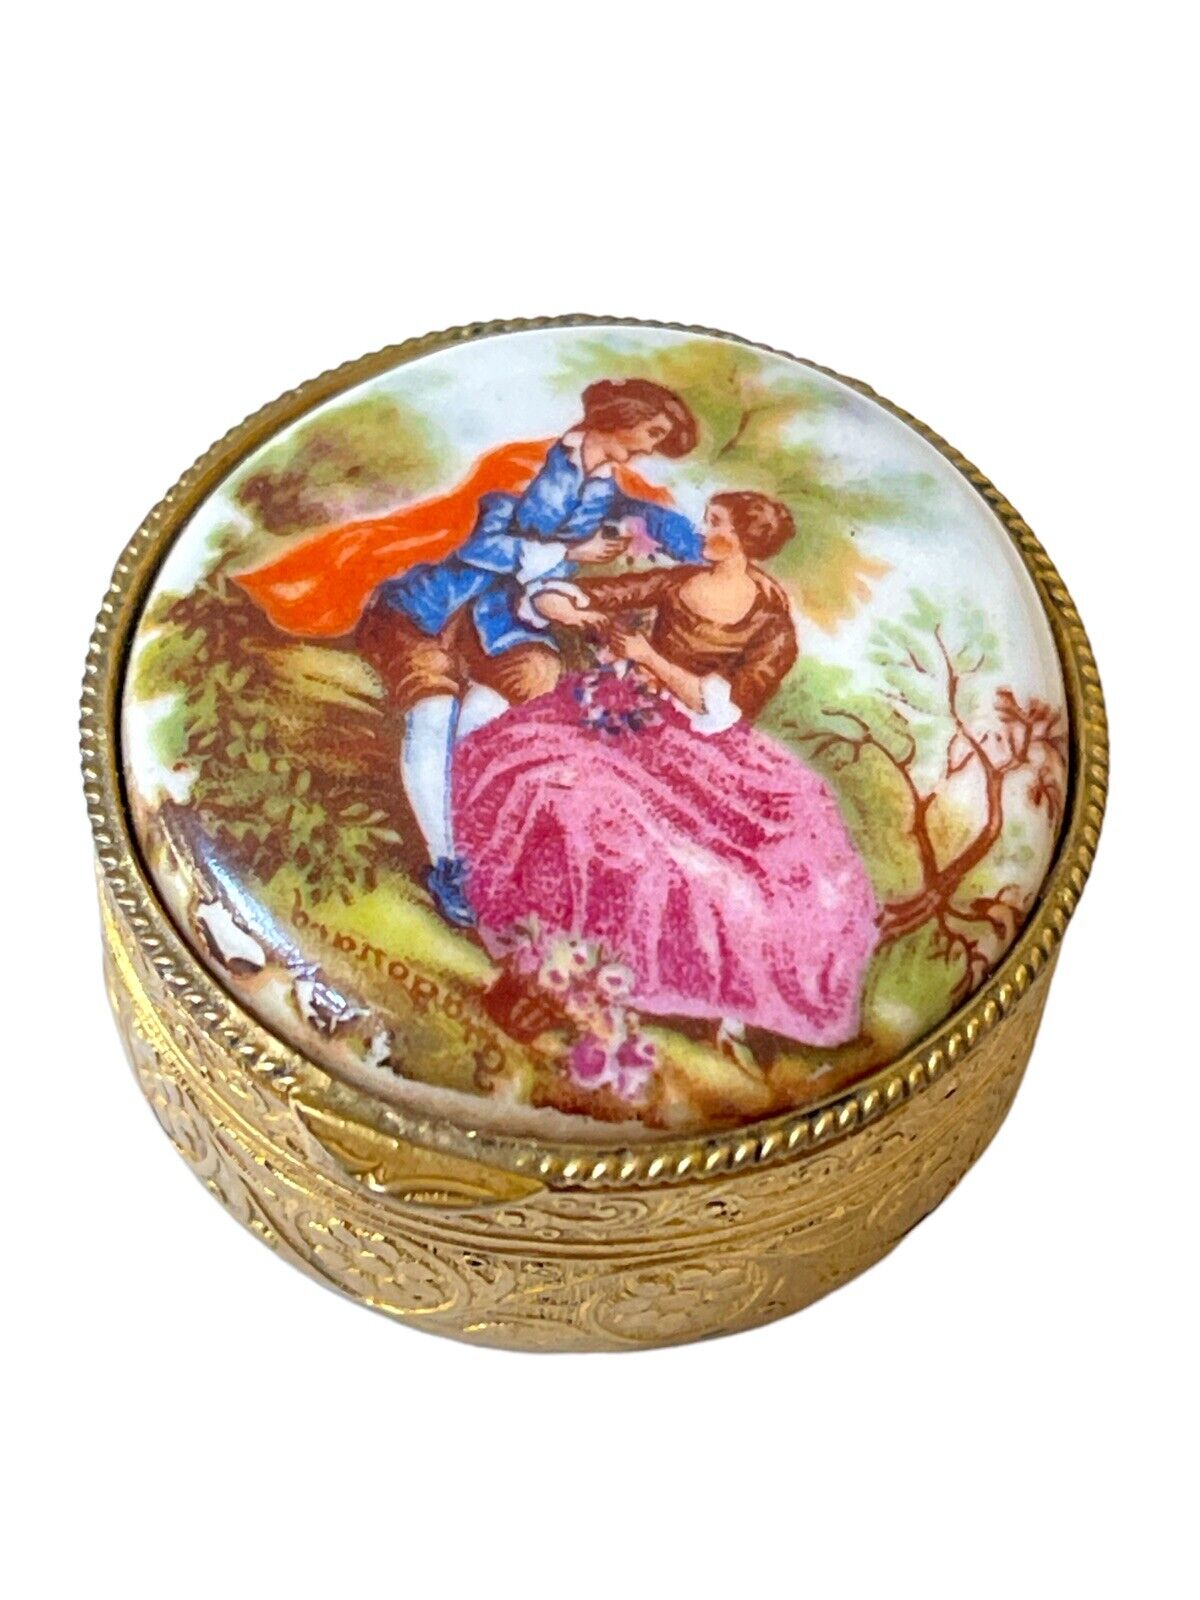 Vintage Trinket Box Porcelain Painting Transfer Courting Couple Pill Box